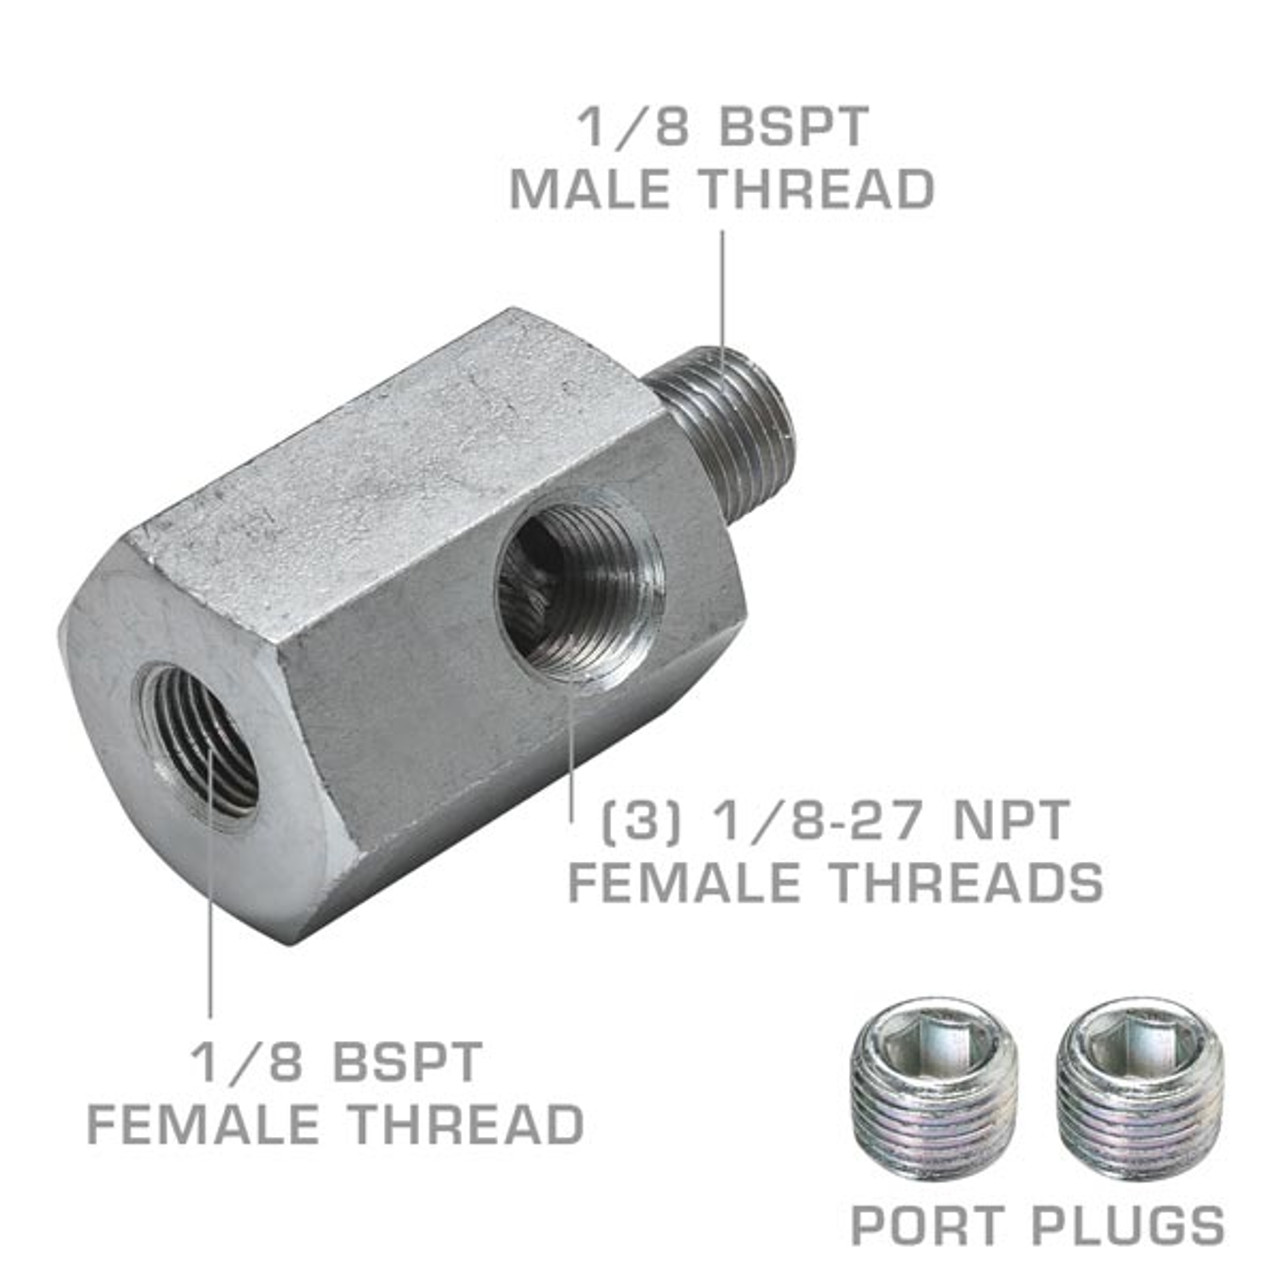 FITTING, ADAPTER, METRIC, 1/8 BSPT MALE TO 1/8 NPTF